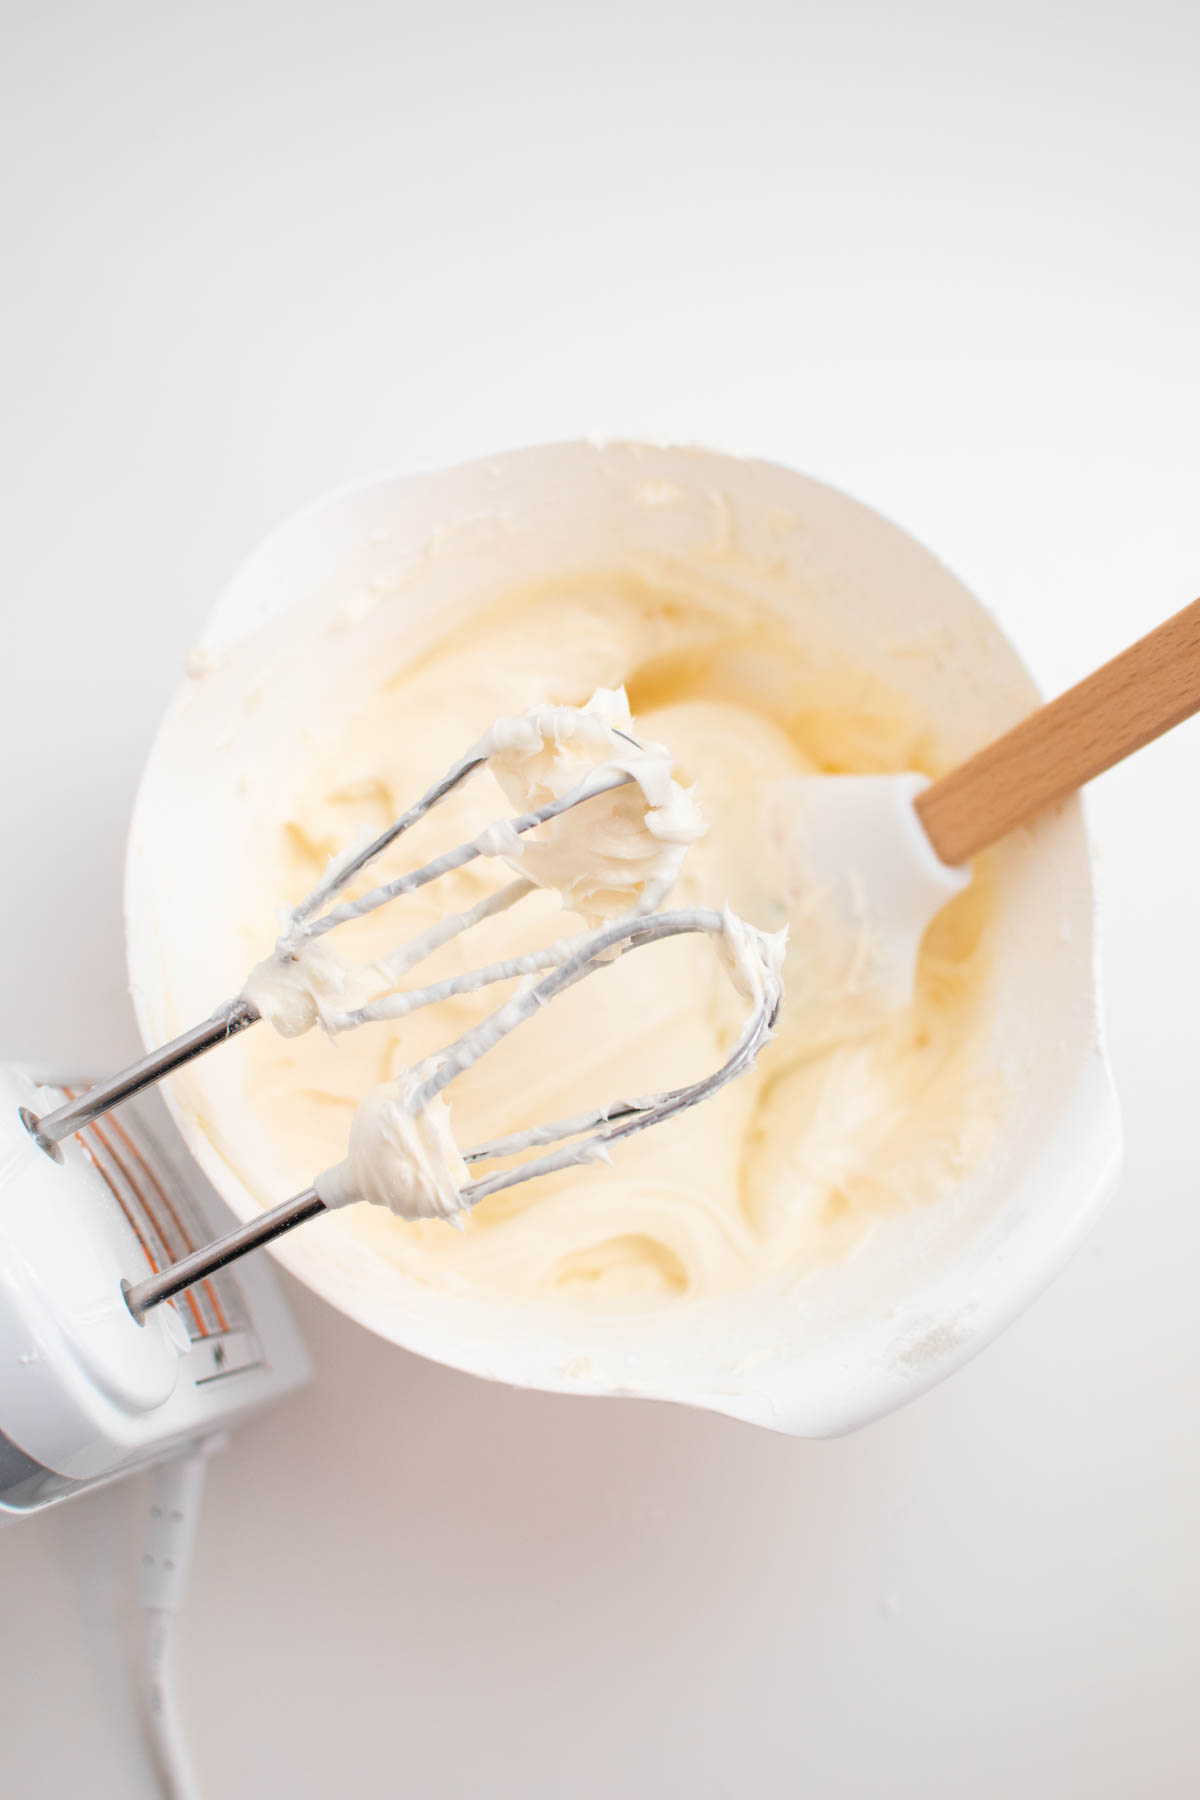 Cream cheese frosting in white bowl with electric beaters above.